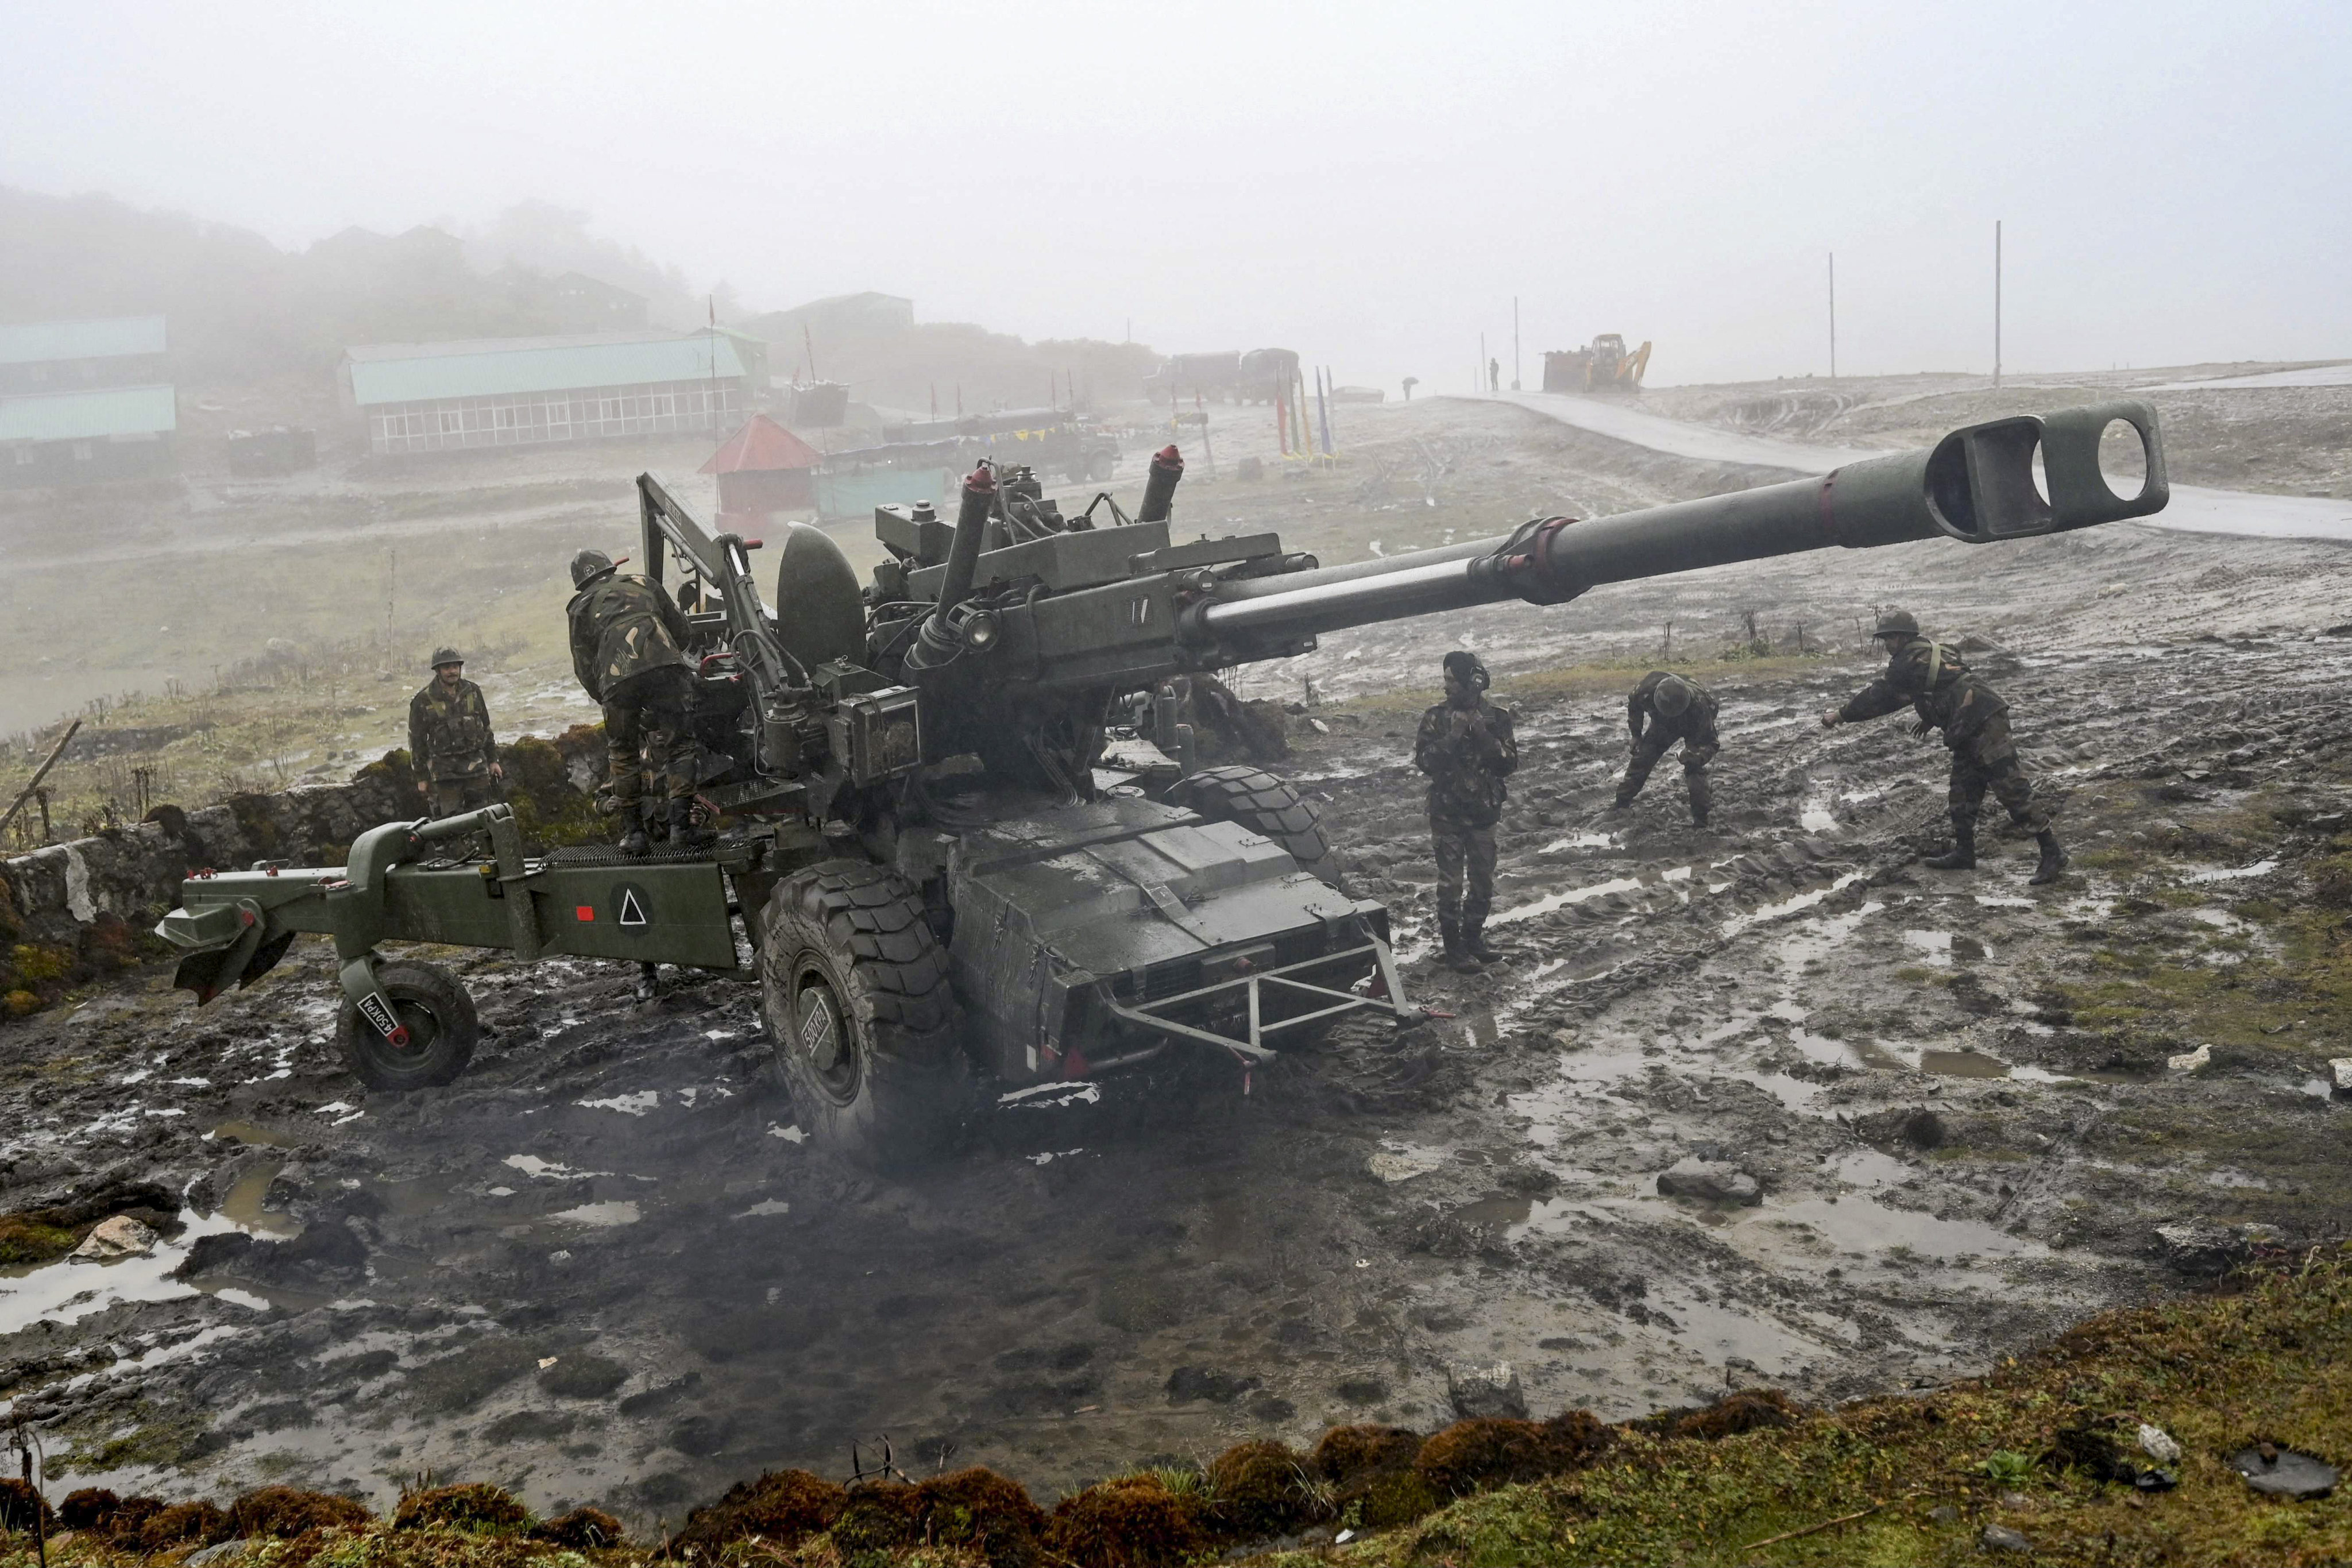 Indian soldiers demonstrate positioning of a Bofors gun at Penga Teng Tso ahead of Tawang, near the Line of Actual Control, in India’s Arunachal Pradesh state in October 2021. Photo: AFP